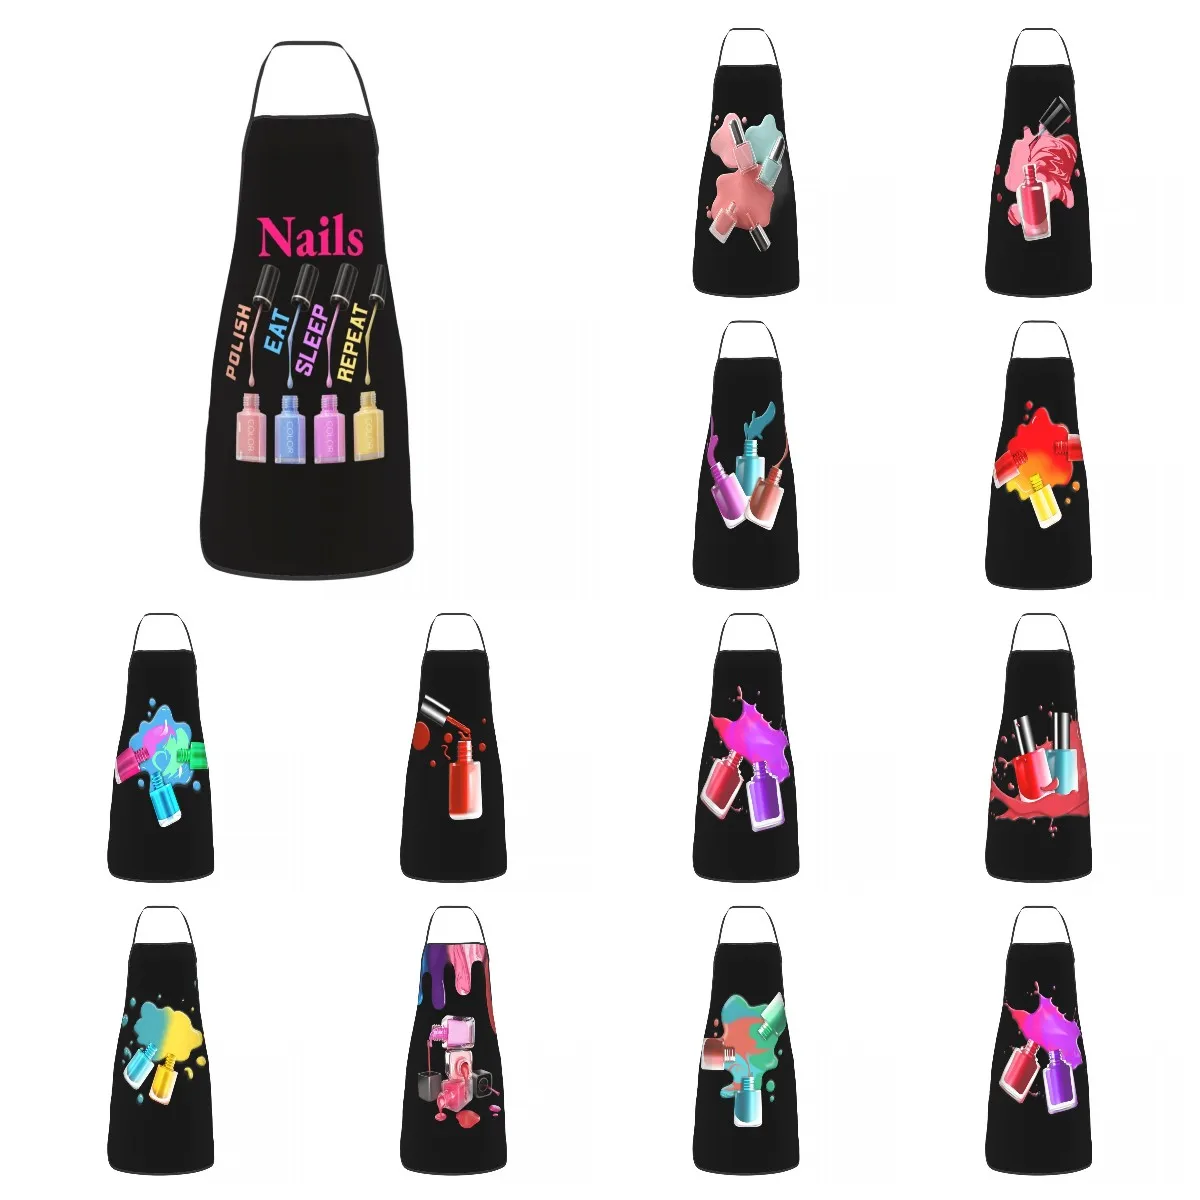 Nails Polish Eat Sleep Repeat Apron Kitchen Chef Cooking Baking Bib Women Men Tech Funny Quotes Tablier Cuisine for Painting